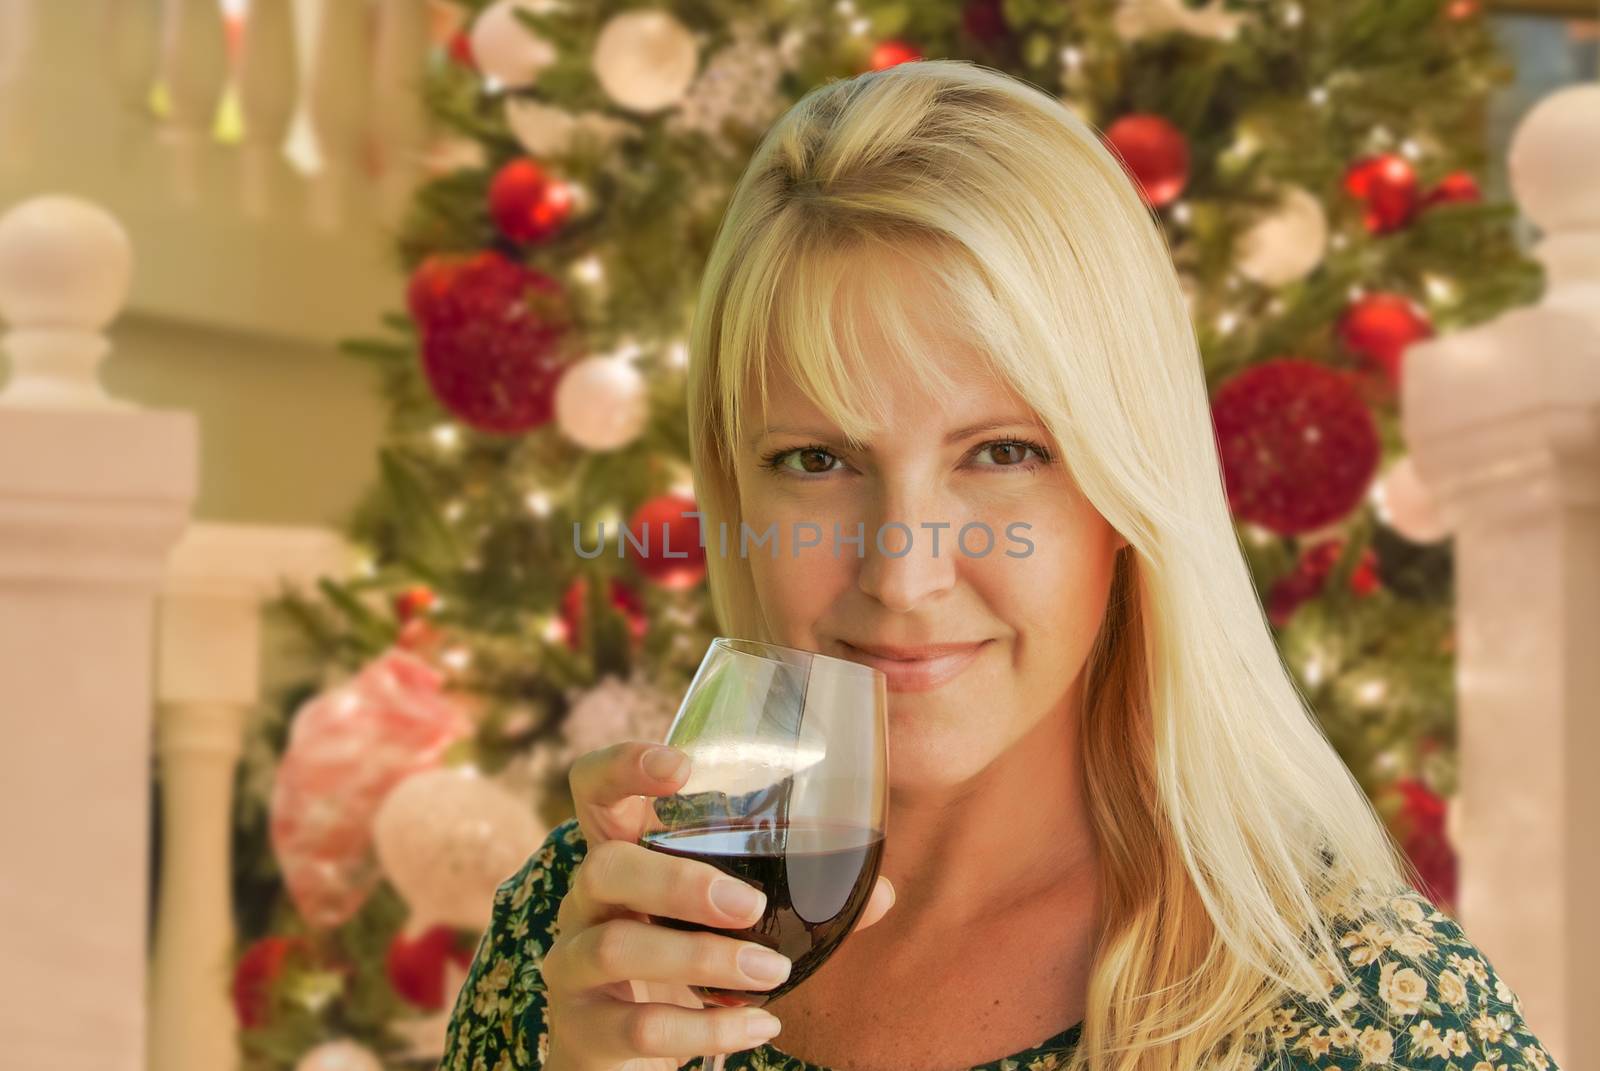 Blond Woman with Wine Glass In Front of Decrated Christmas Tree.